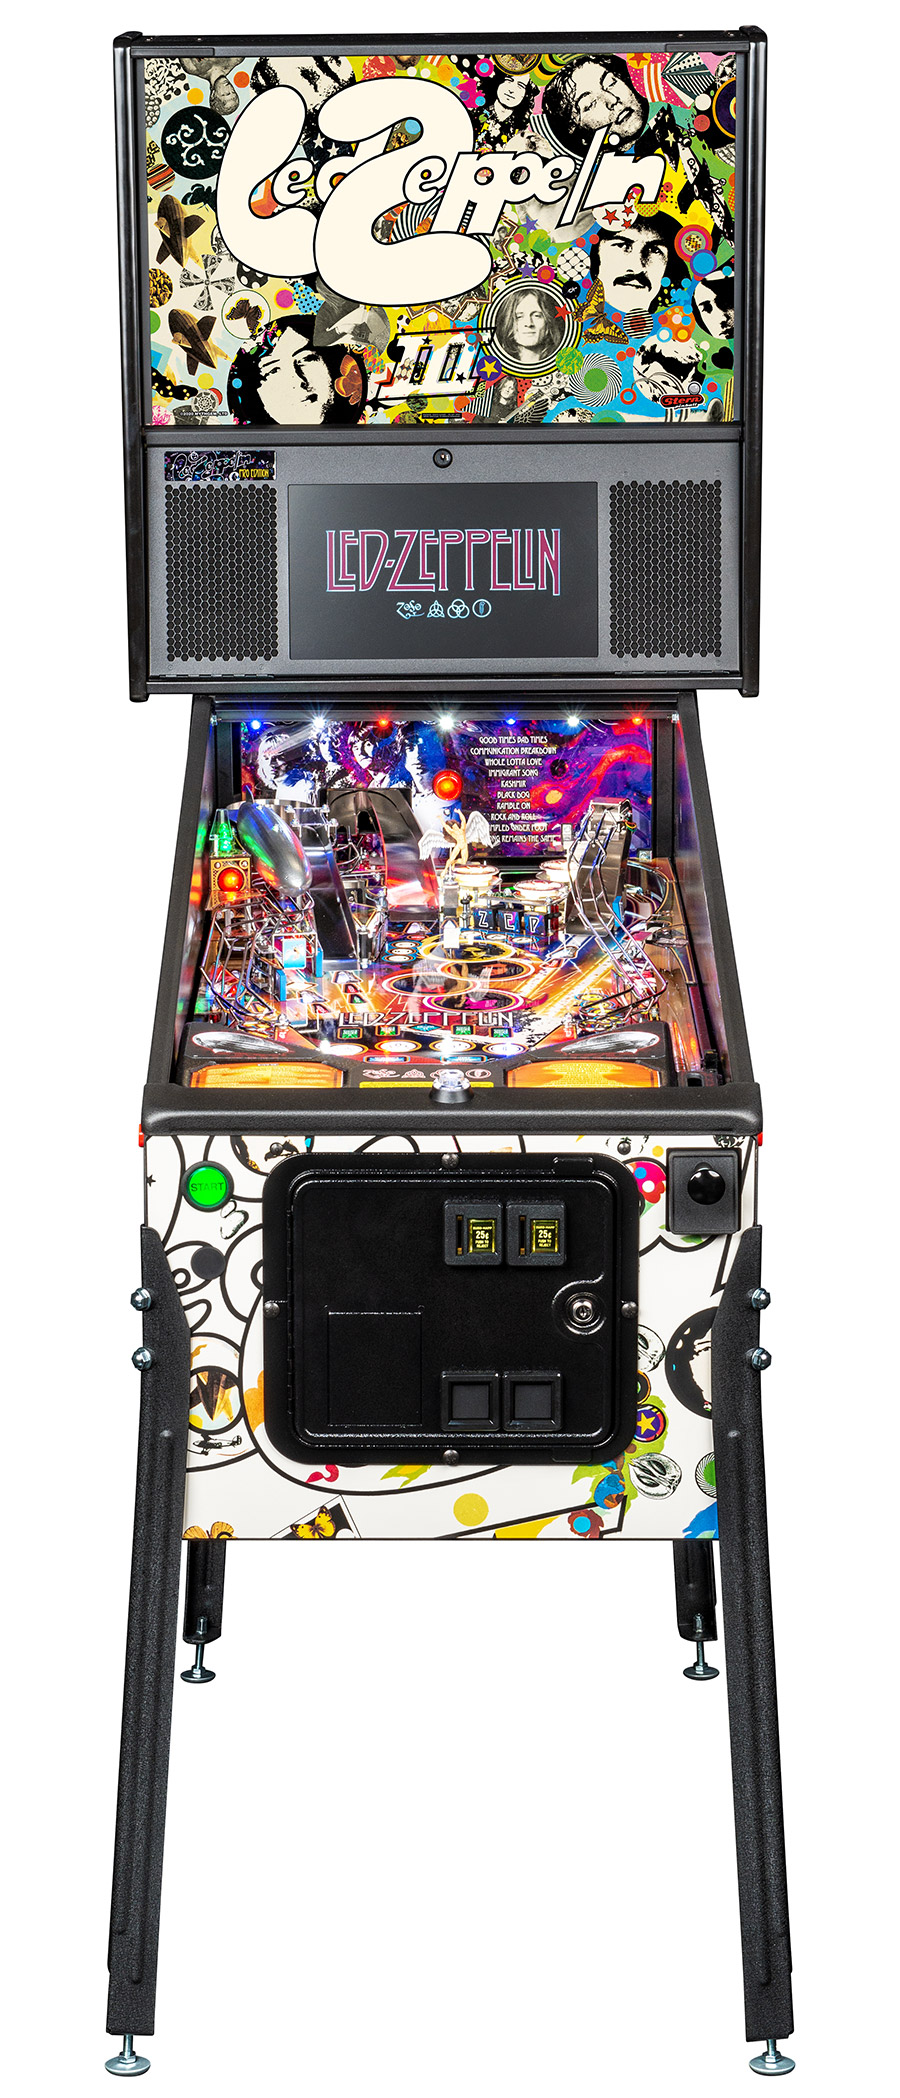 STERN REVEALS LED ZEPPELIN PINBALL – Welcome to Pinball News – First & Free